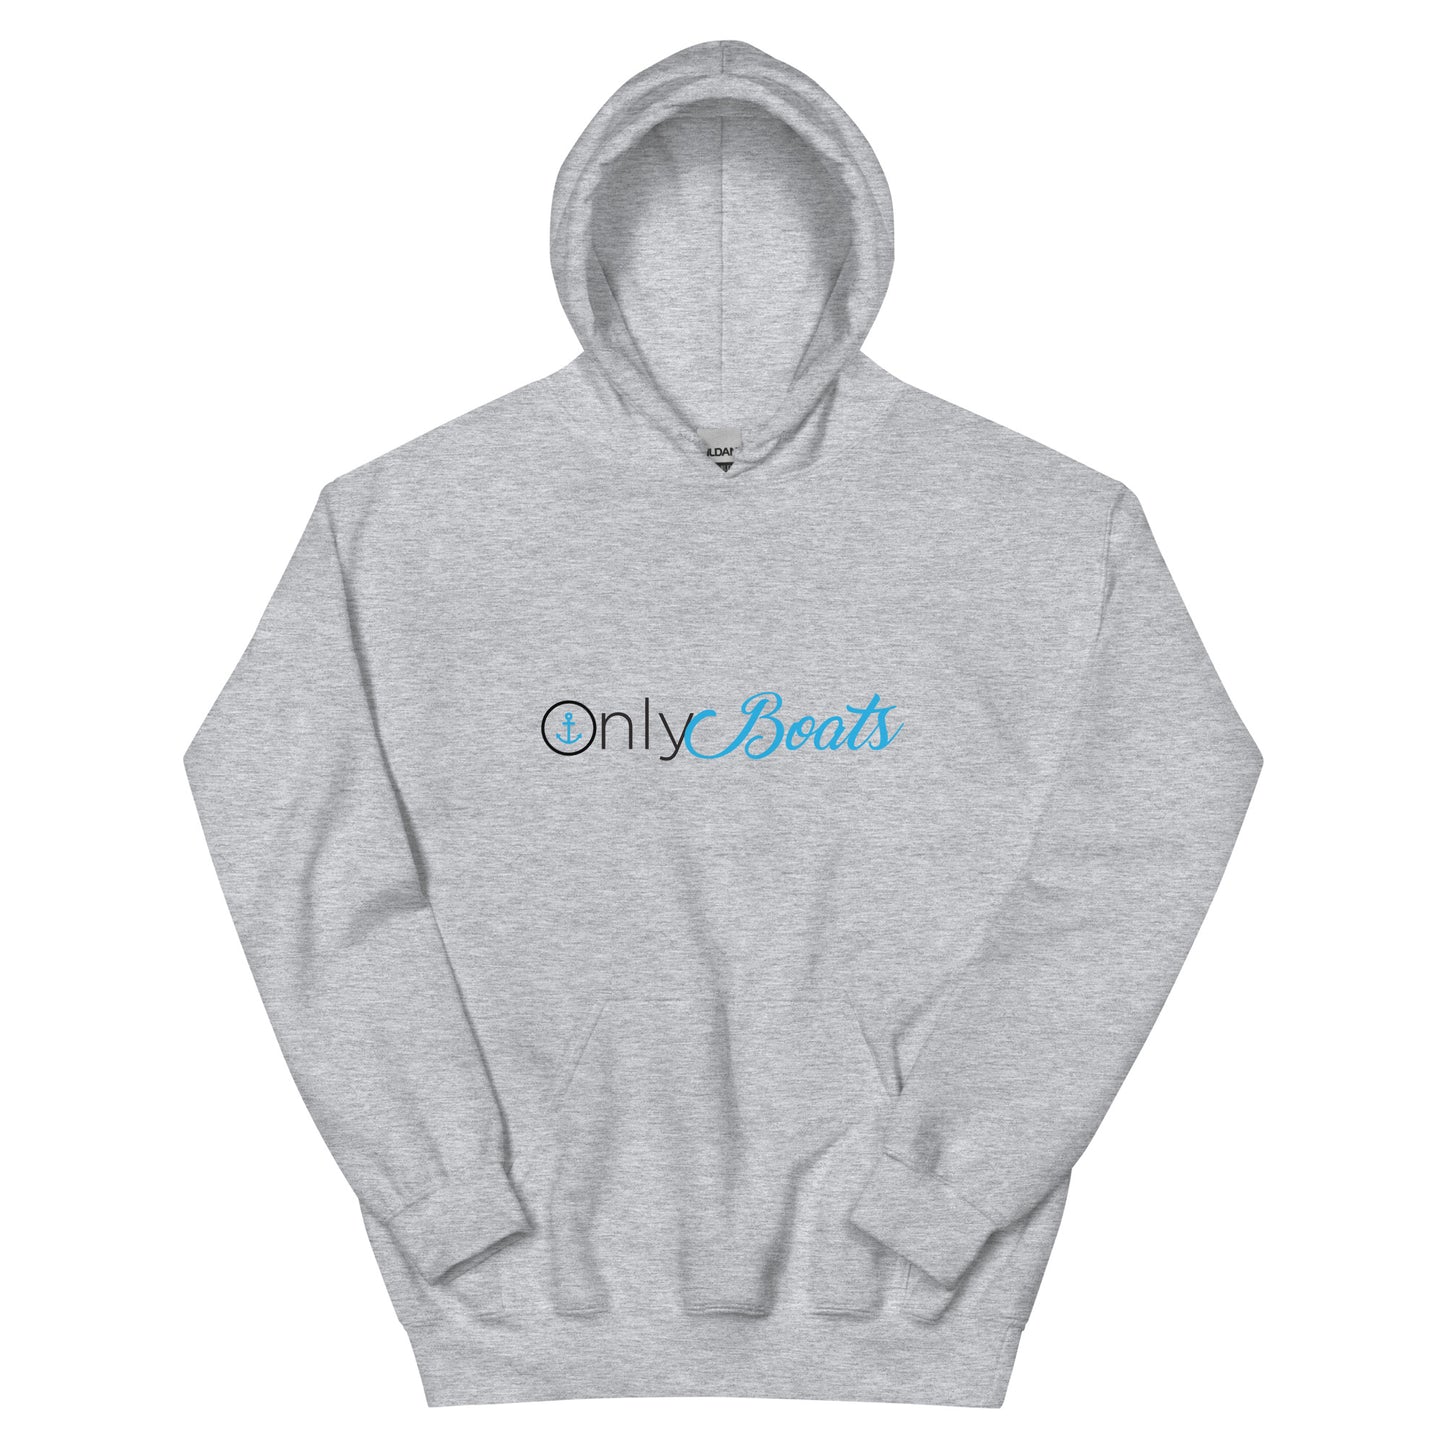 Fans Hoodie - ONLY BOATS